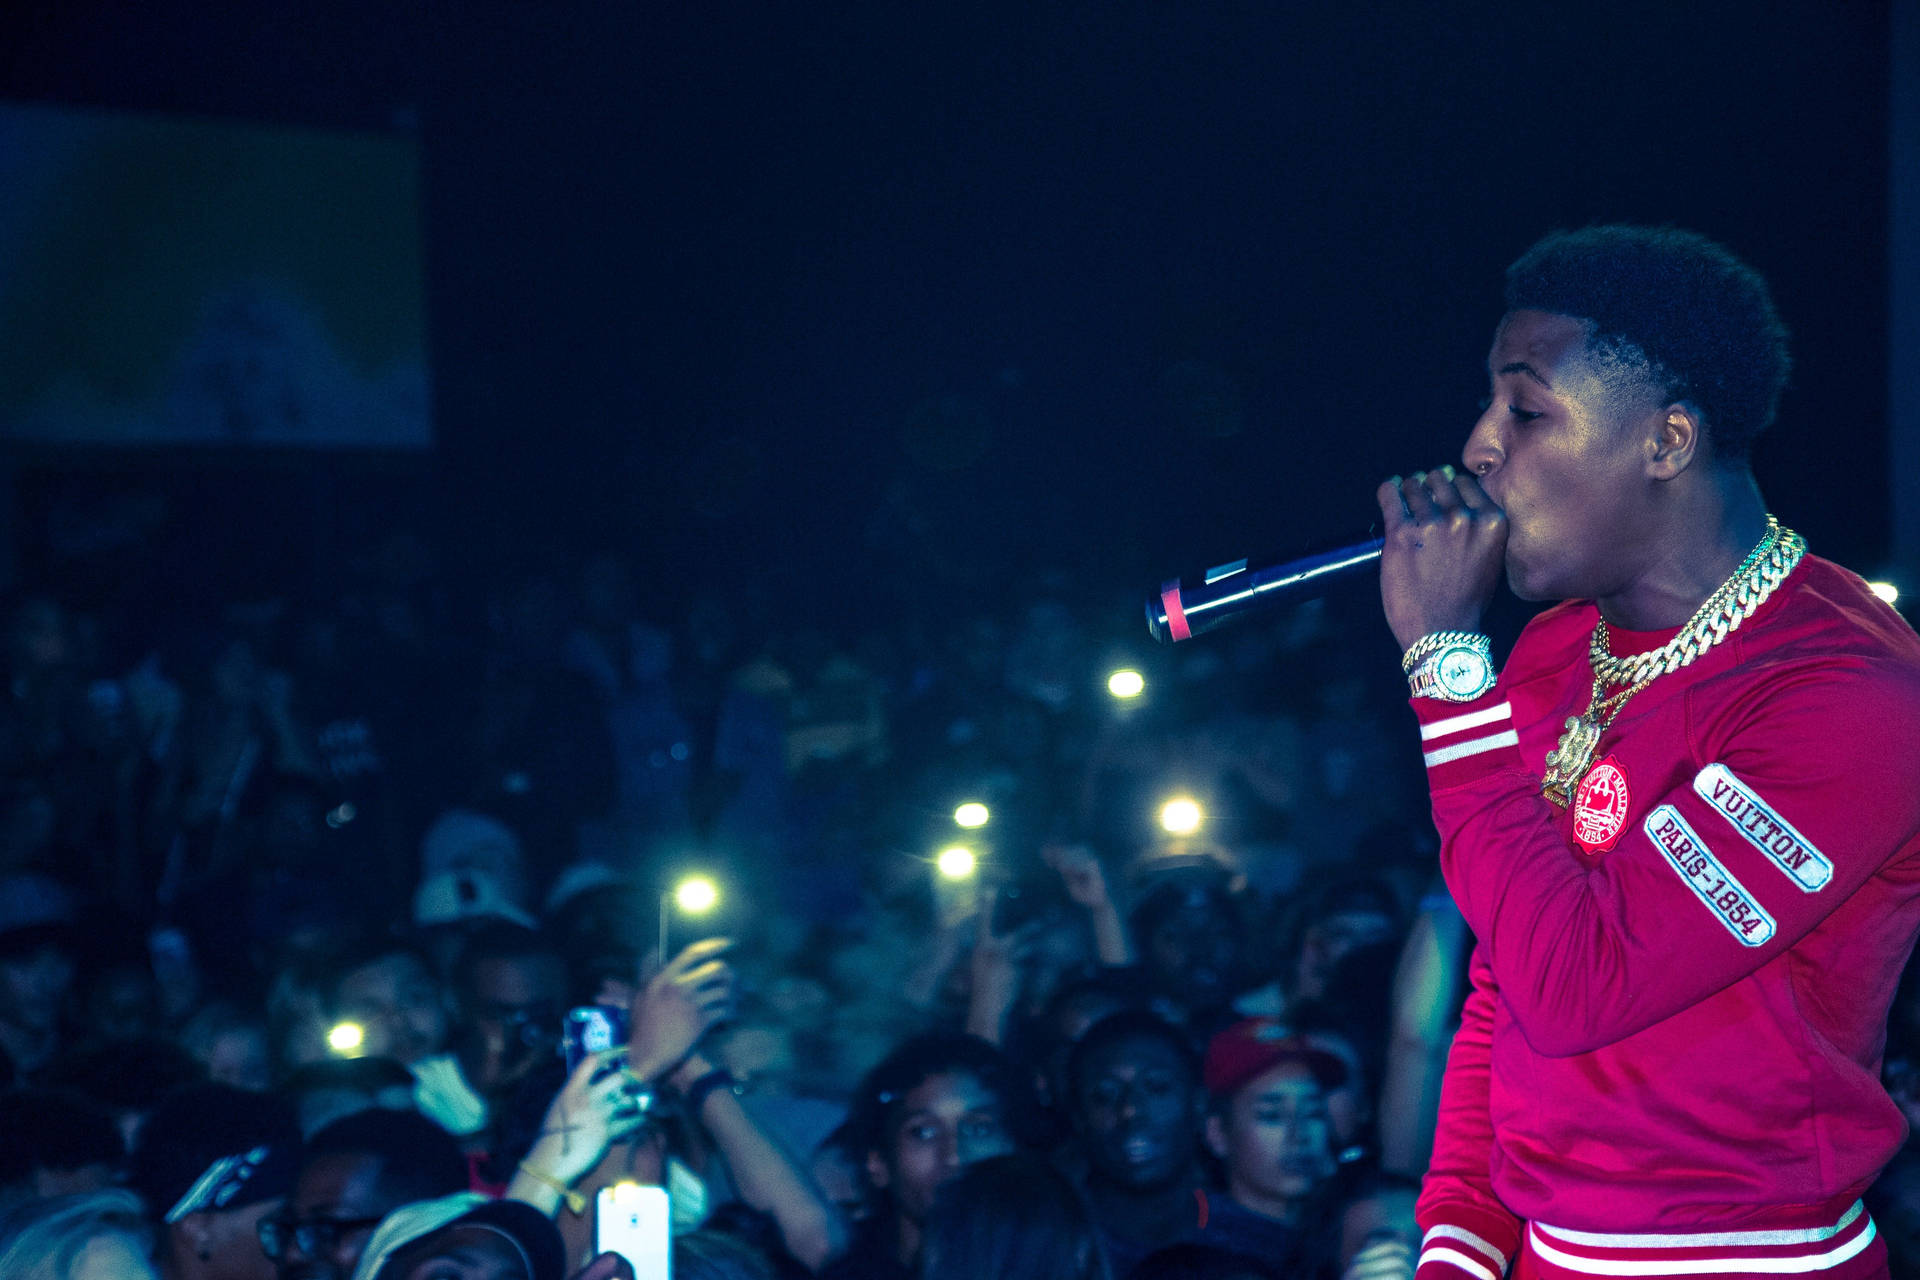 Nba Youngboy Concert Background